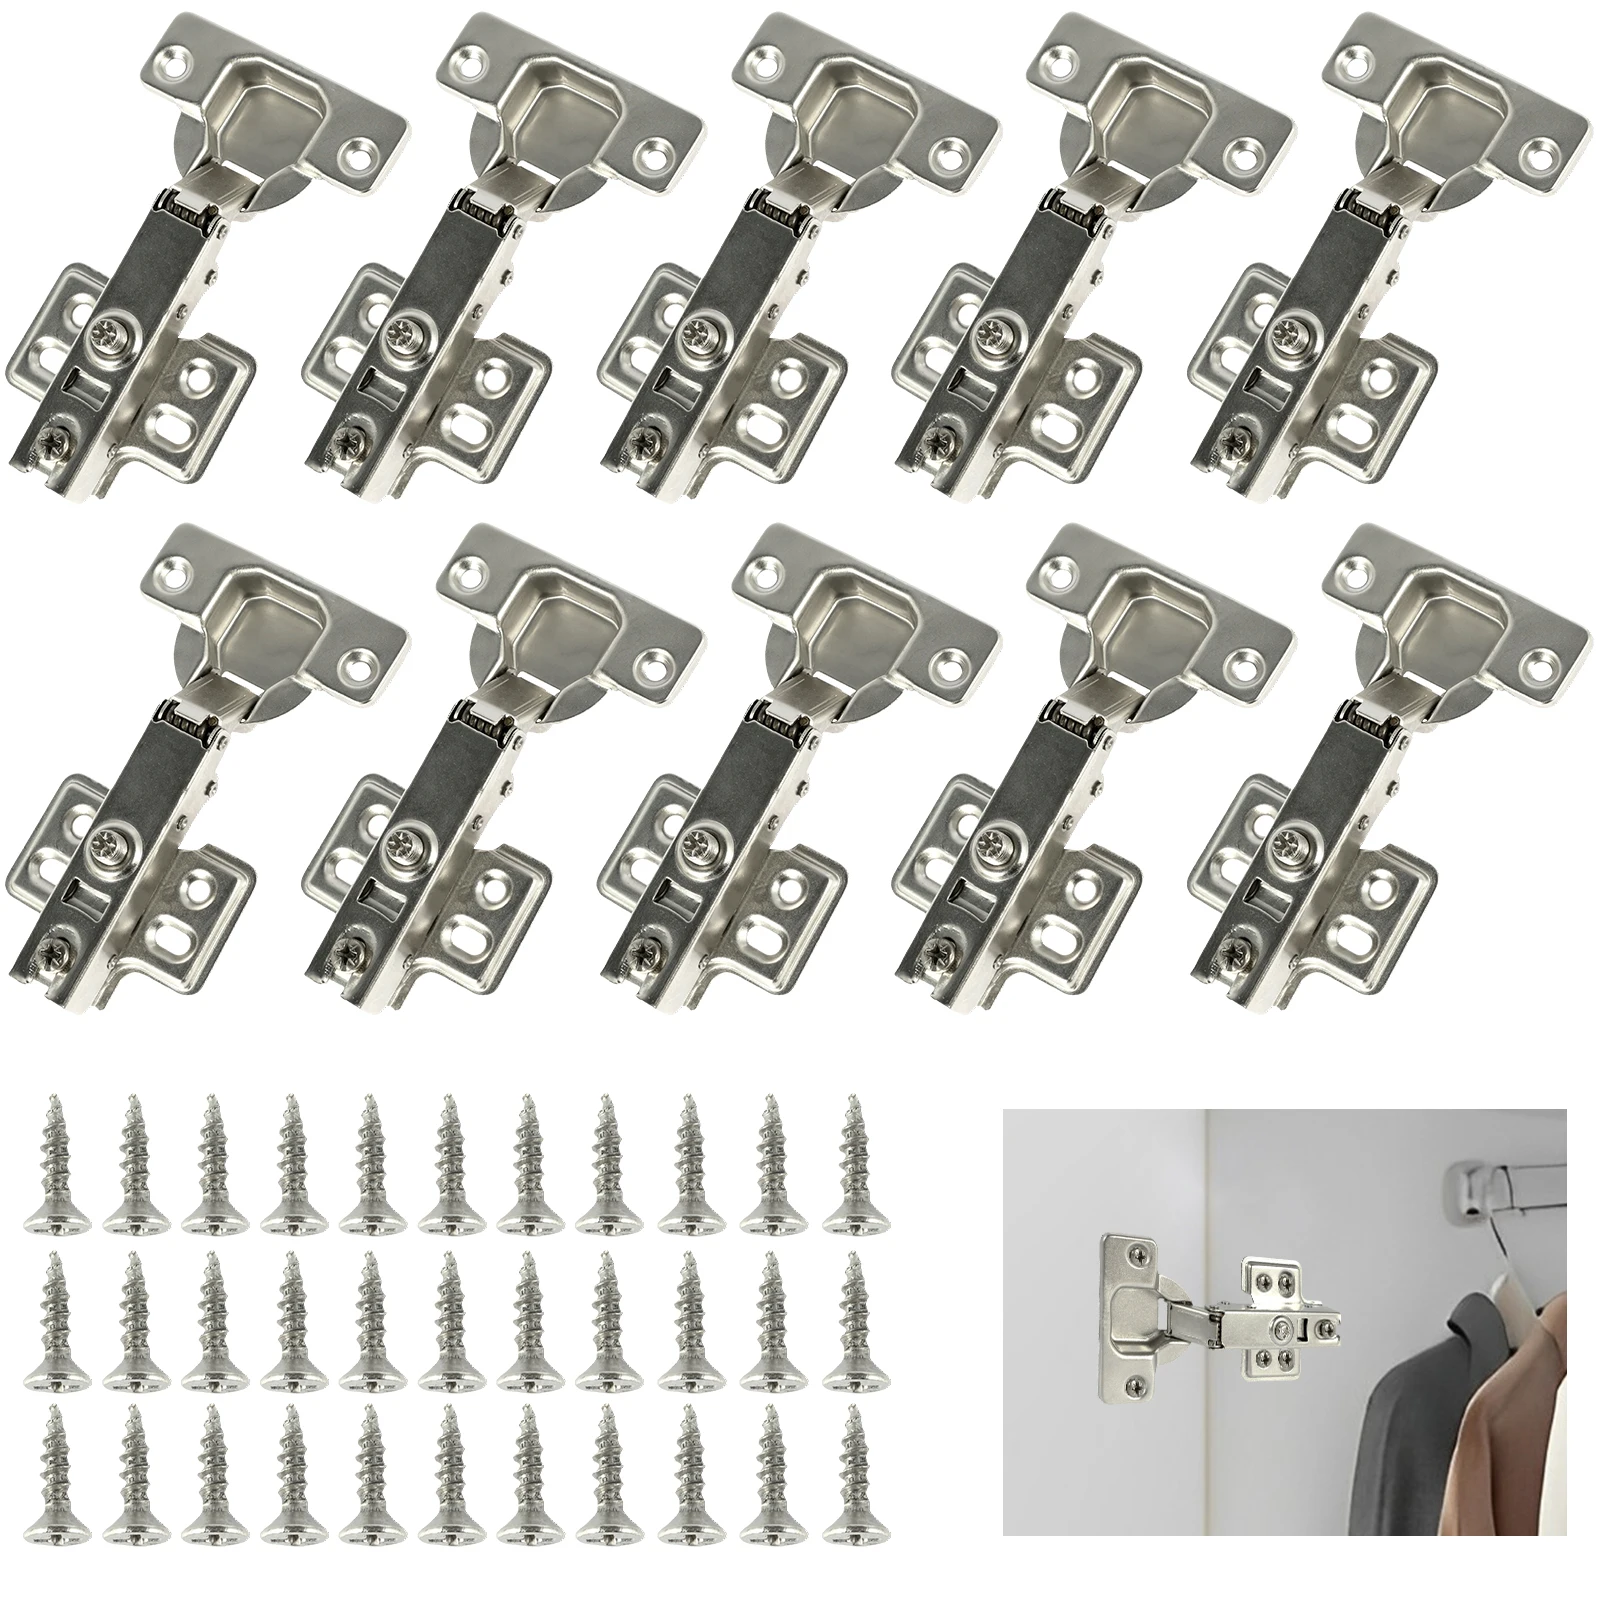 10Pcs Cupboard Hinges Full Overlay Mute Cabinet Door Hinges Set with Screws 95°-105° Opening Angle for Kitchen Bathroom Cabinet